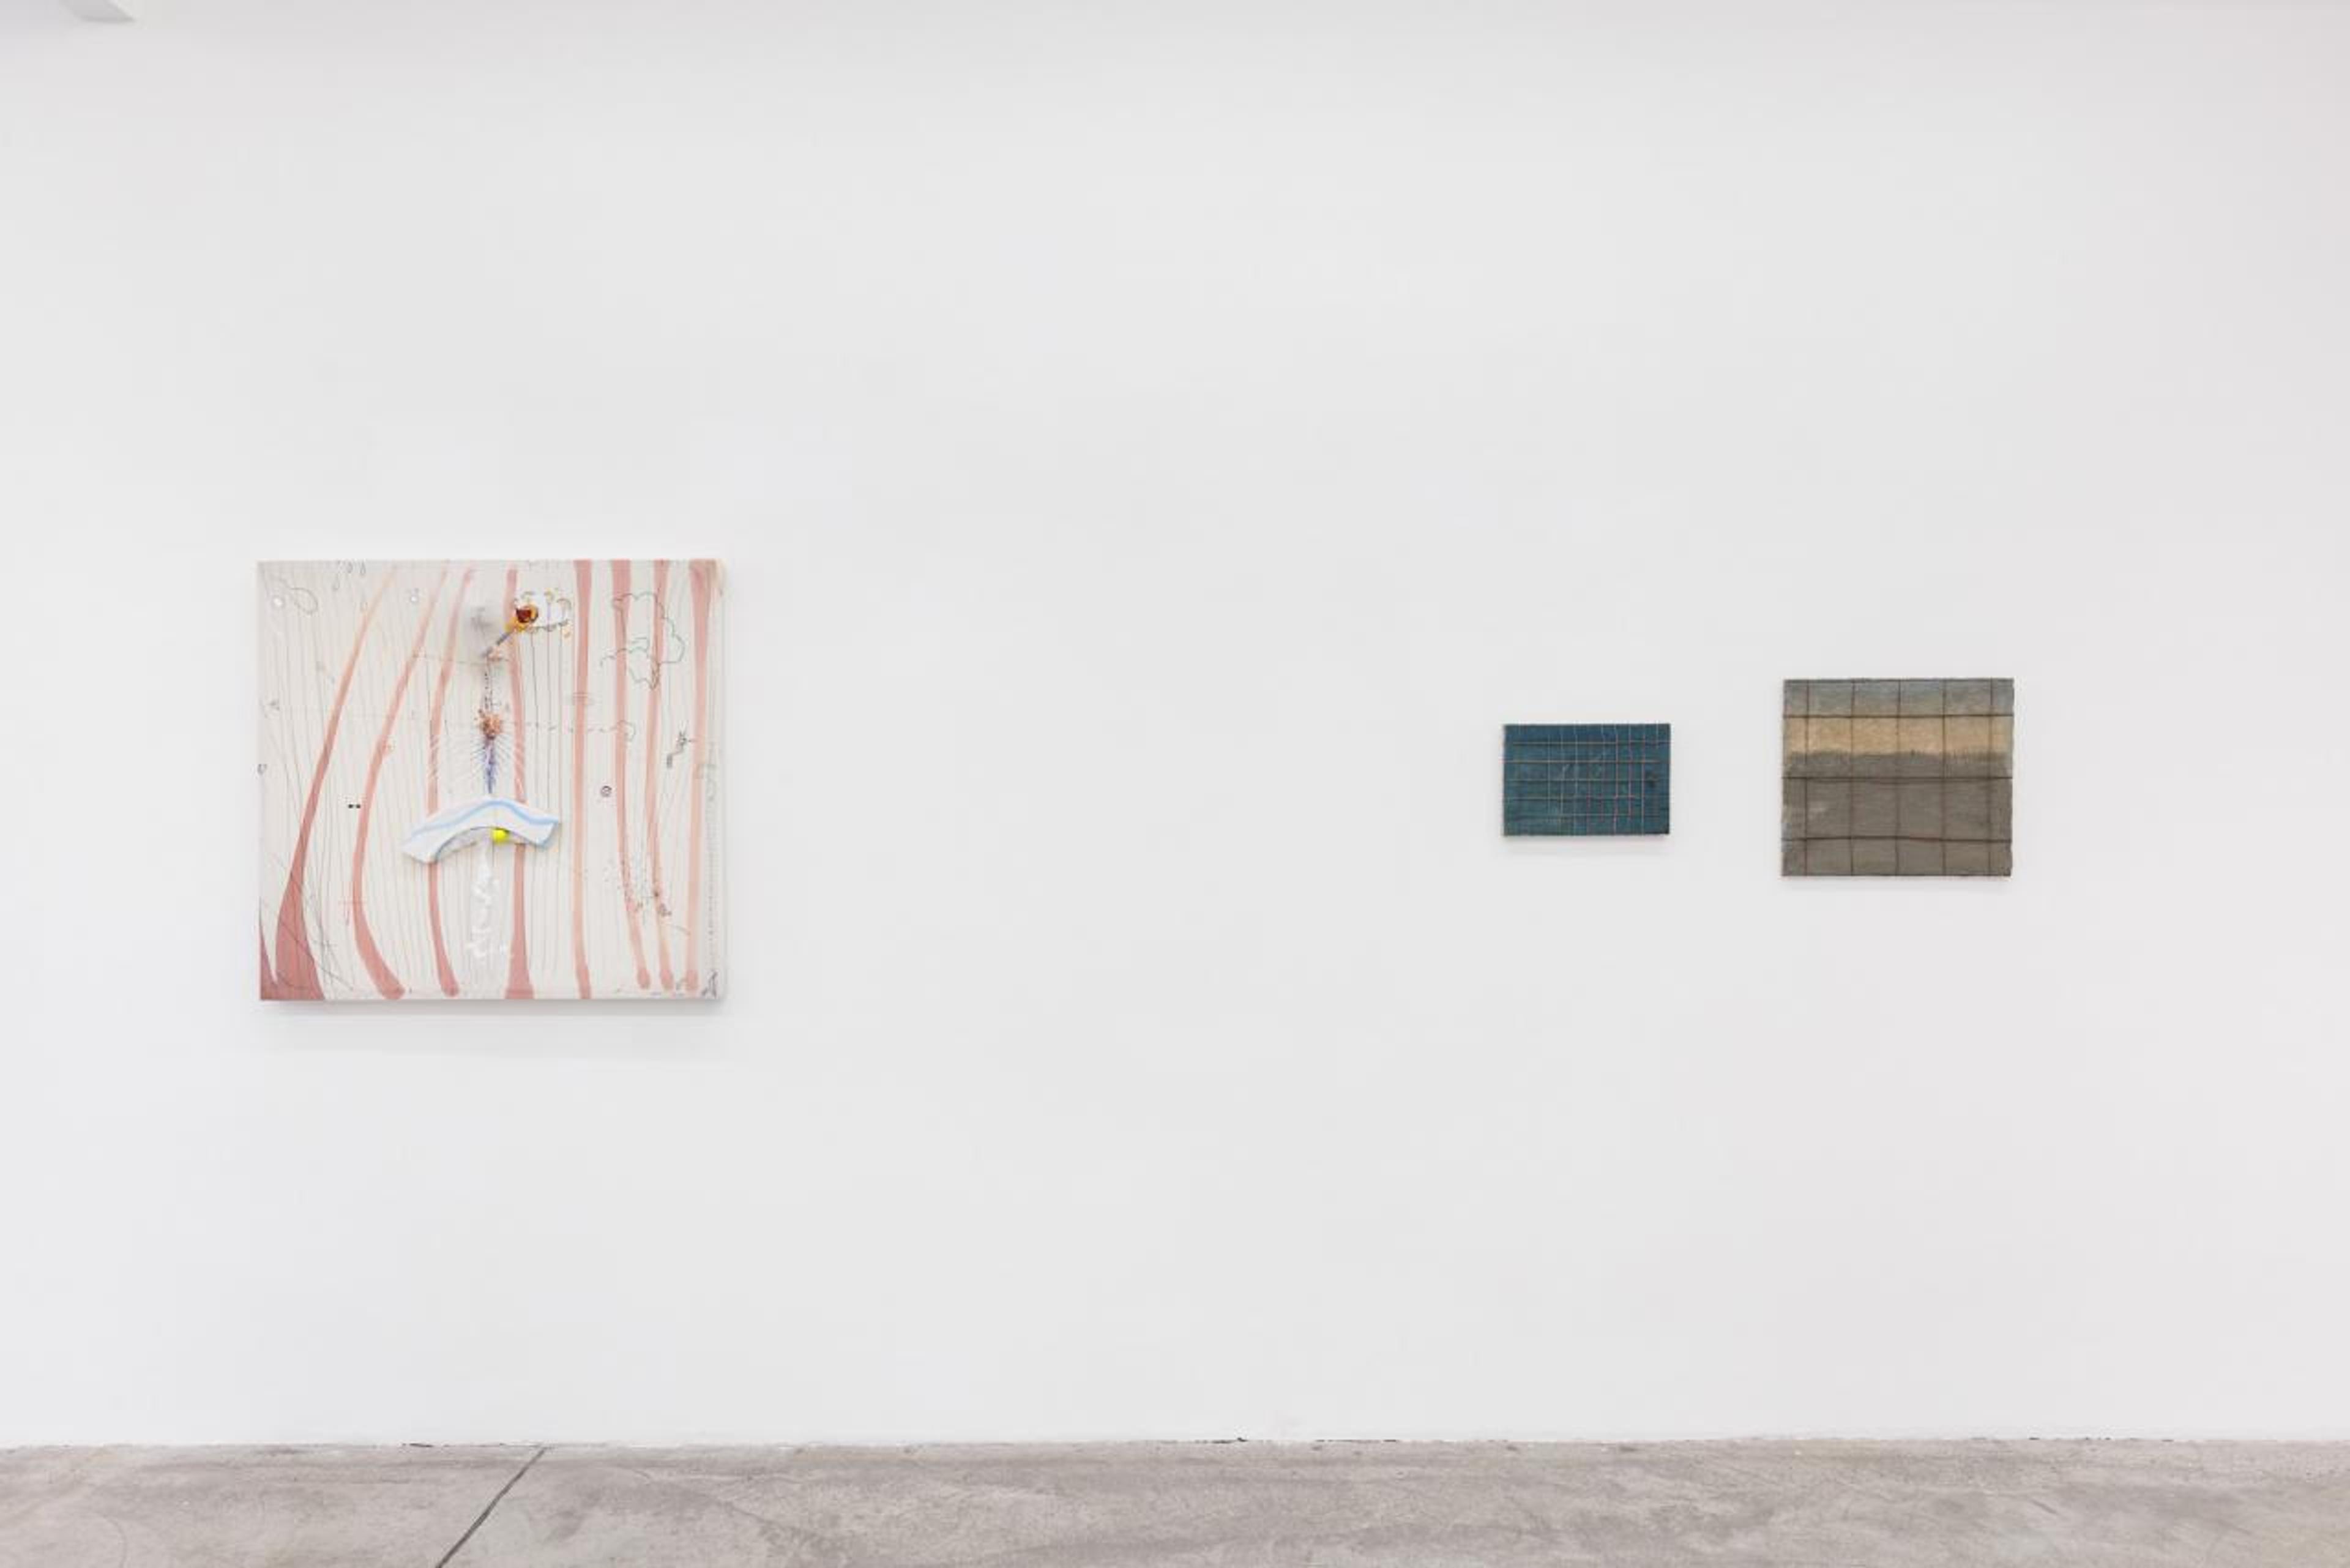 View of “Between 58 and 131 infinitely,” curated by Luiza Teixeira de Freitas, Galerie Martin Janda, 2023